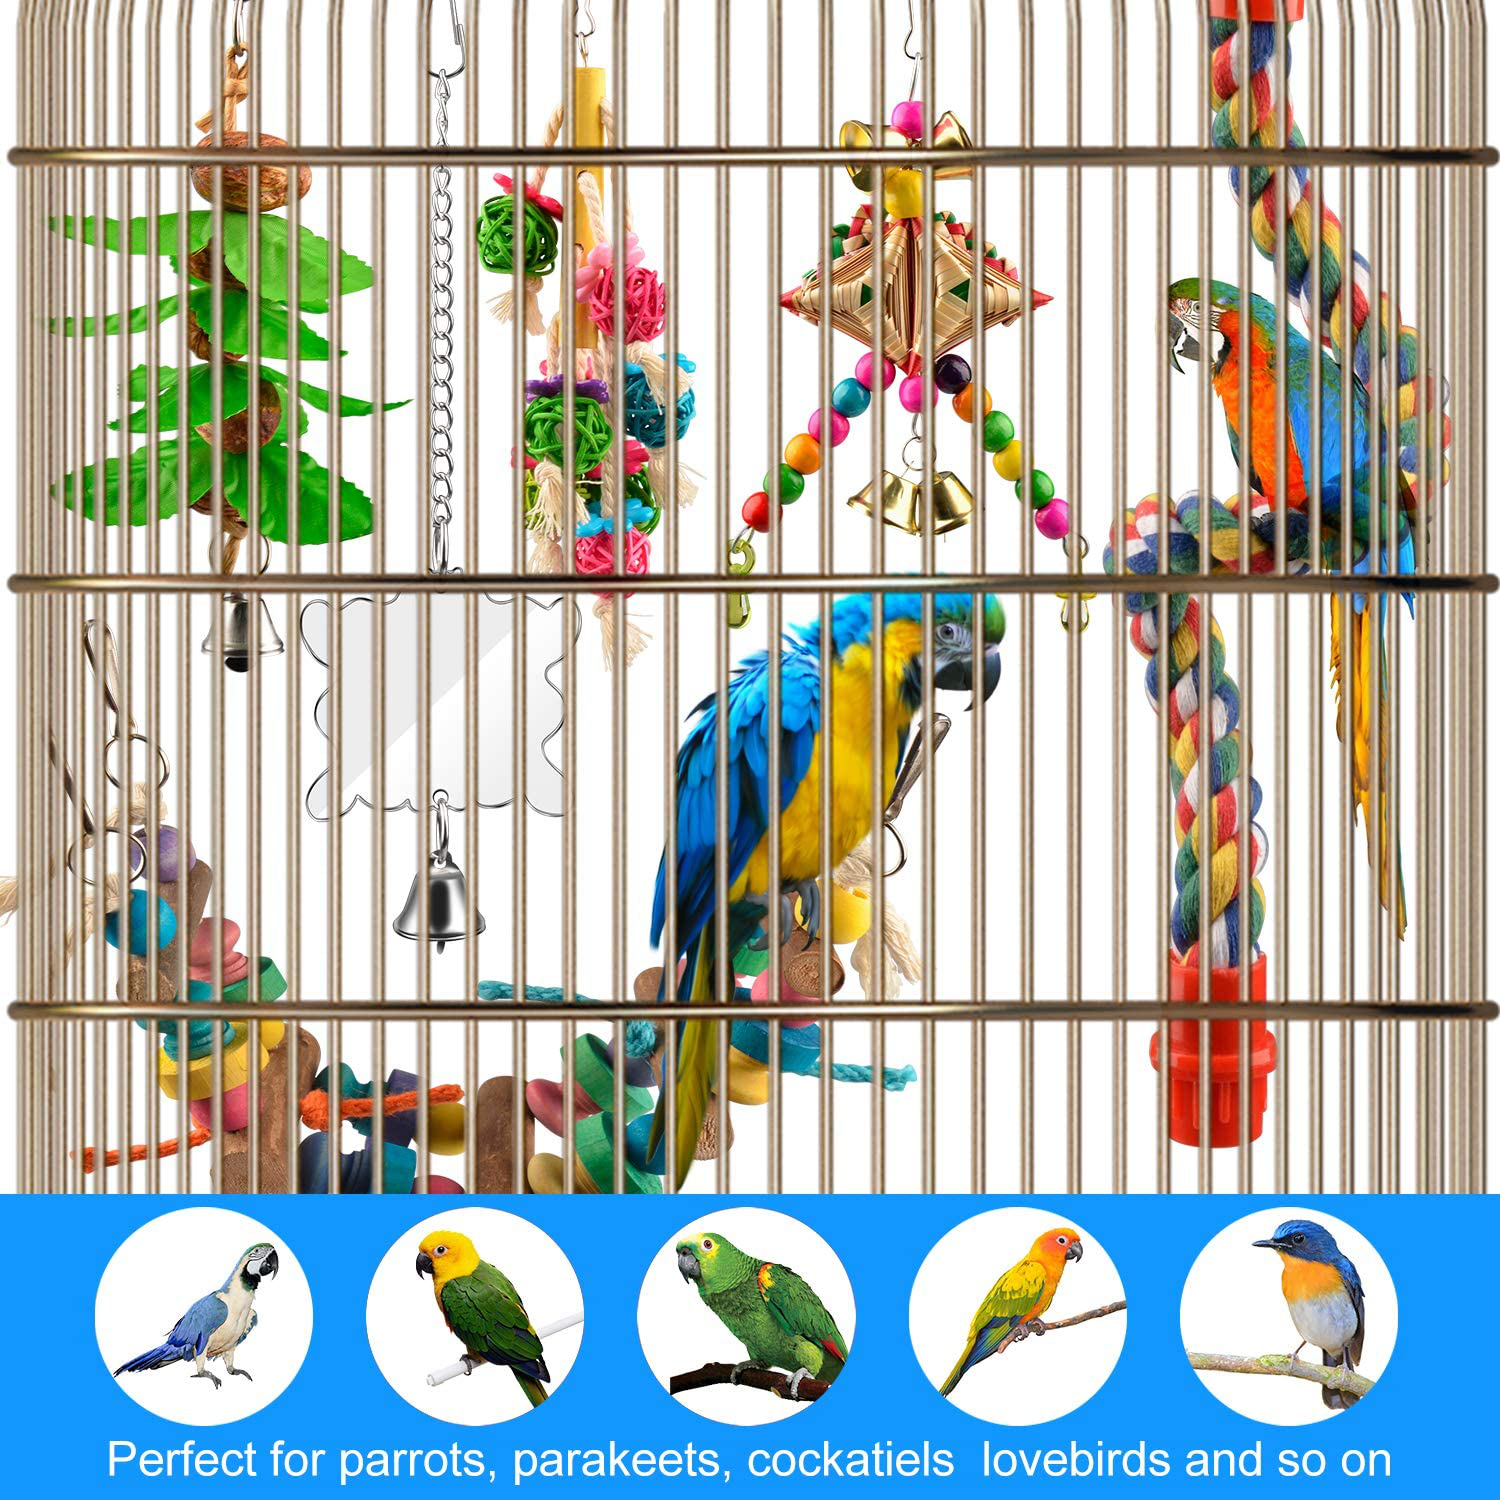 AOPMET Bird Swing Toys 6Pcs, Parrot Swing Chewing Toys Hanging Perches with Bells, Pet Bird Swing Chewing Toys for Parakeets Cockatiels, Conures, Parrots, Love Birds